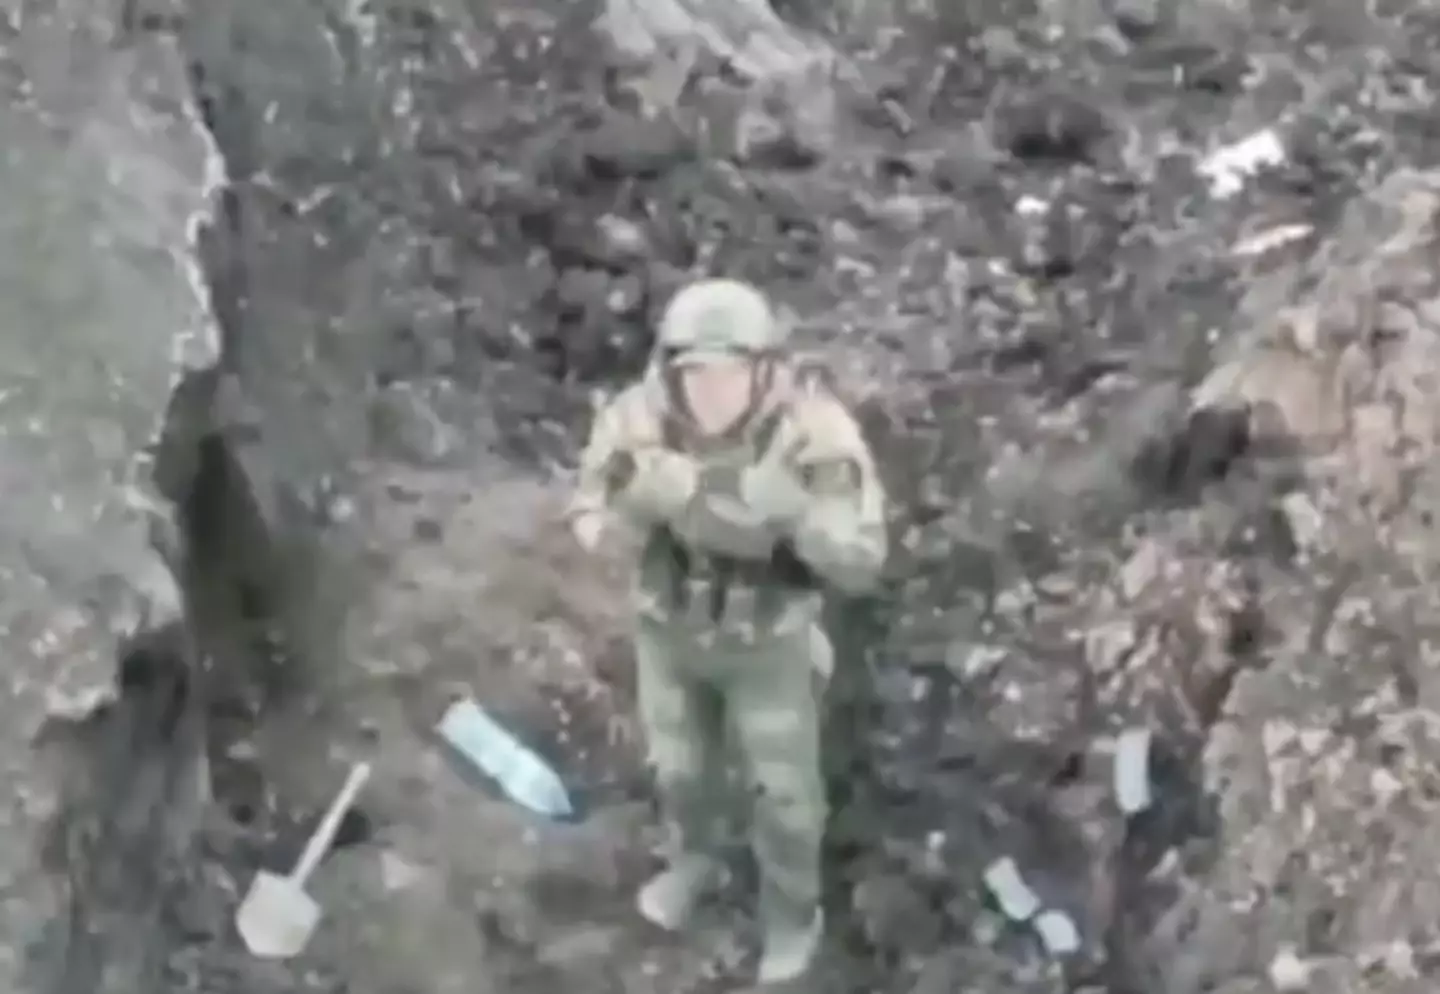 The soldier can be seen shaking his head at the drone.